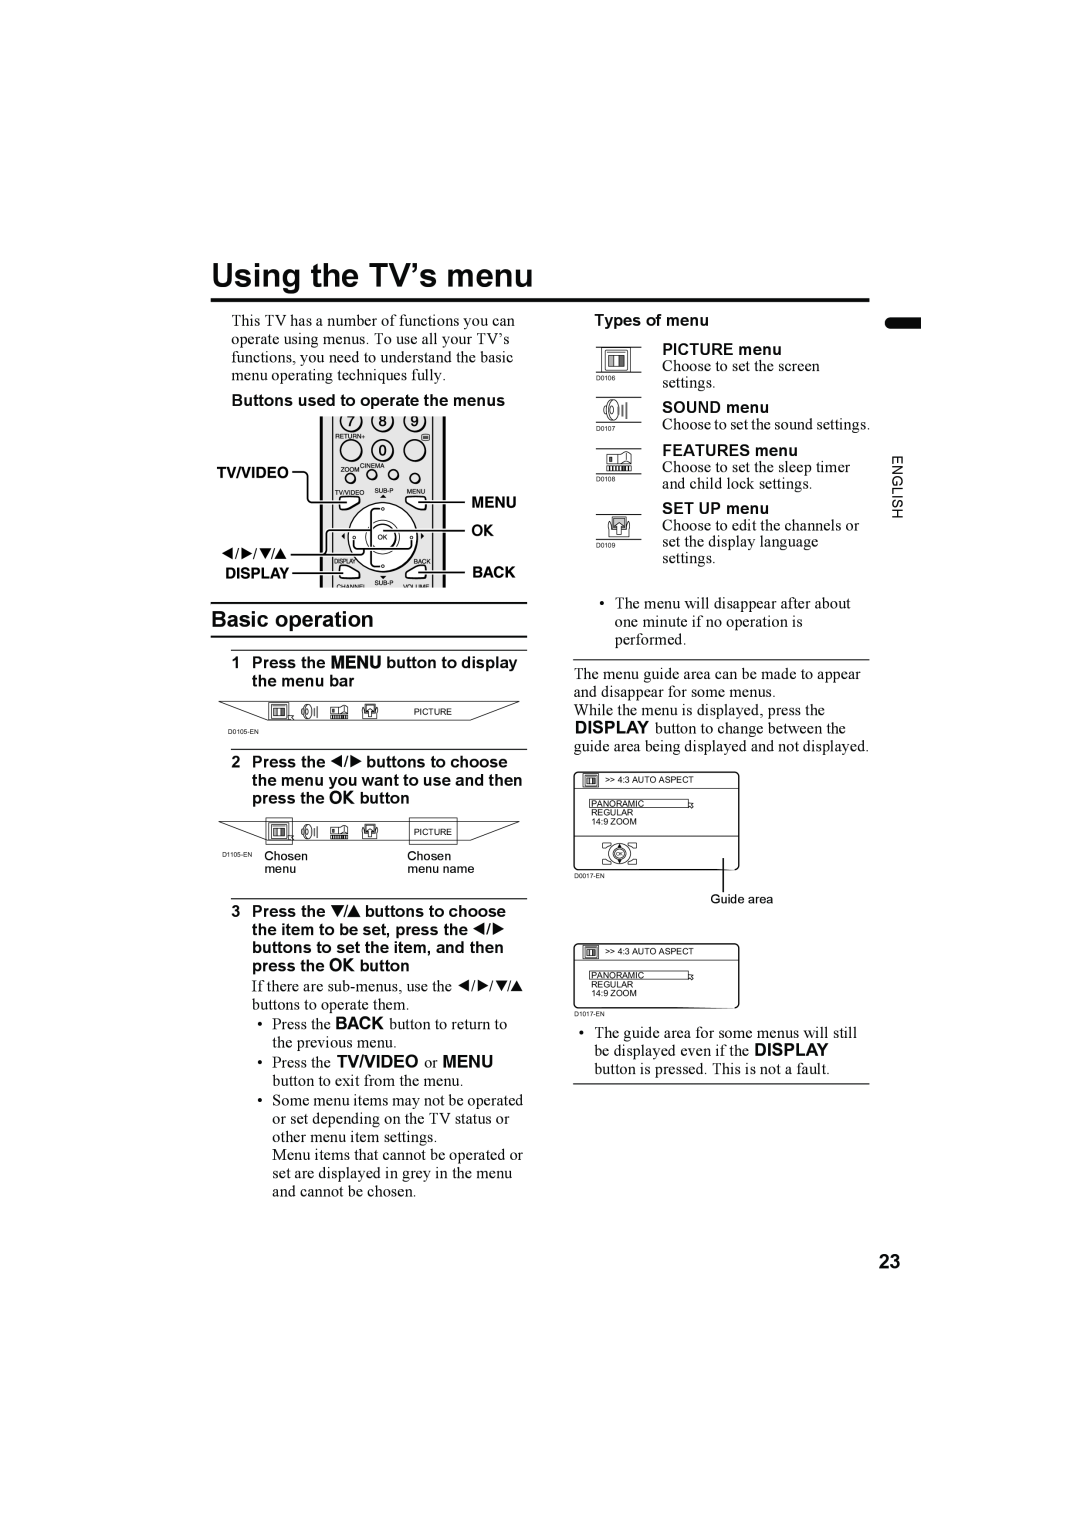 JVC LT-Z32SX4B manual Using the TV’s menu, Buttons used to operate the menus, Types of menu, Basic operation, PICTURE menu 